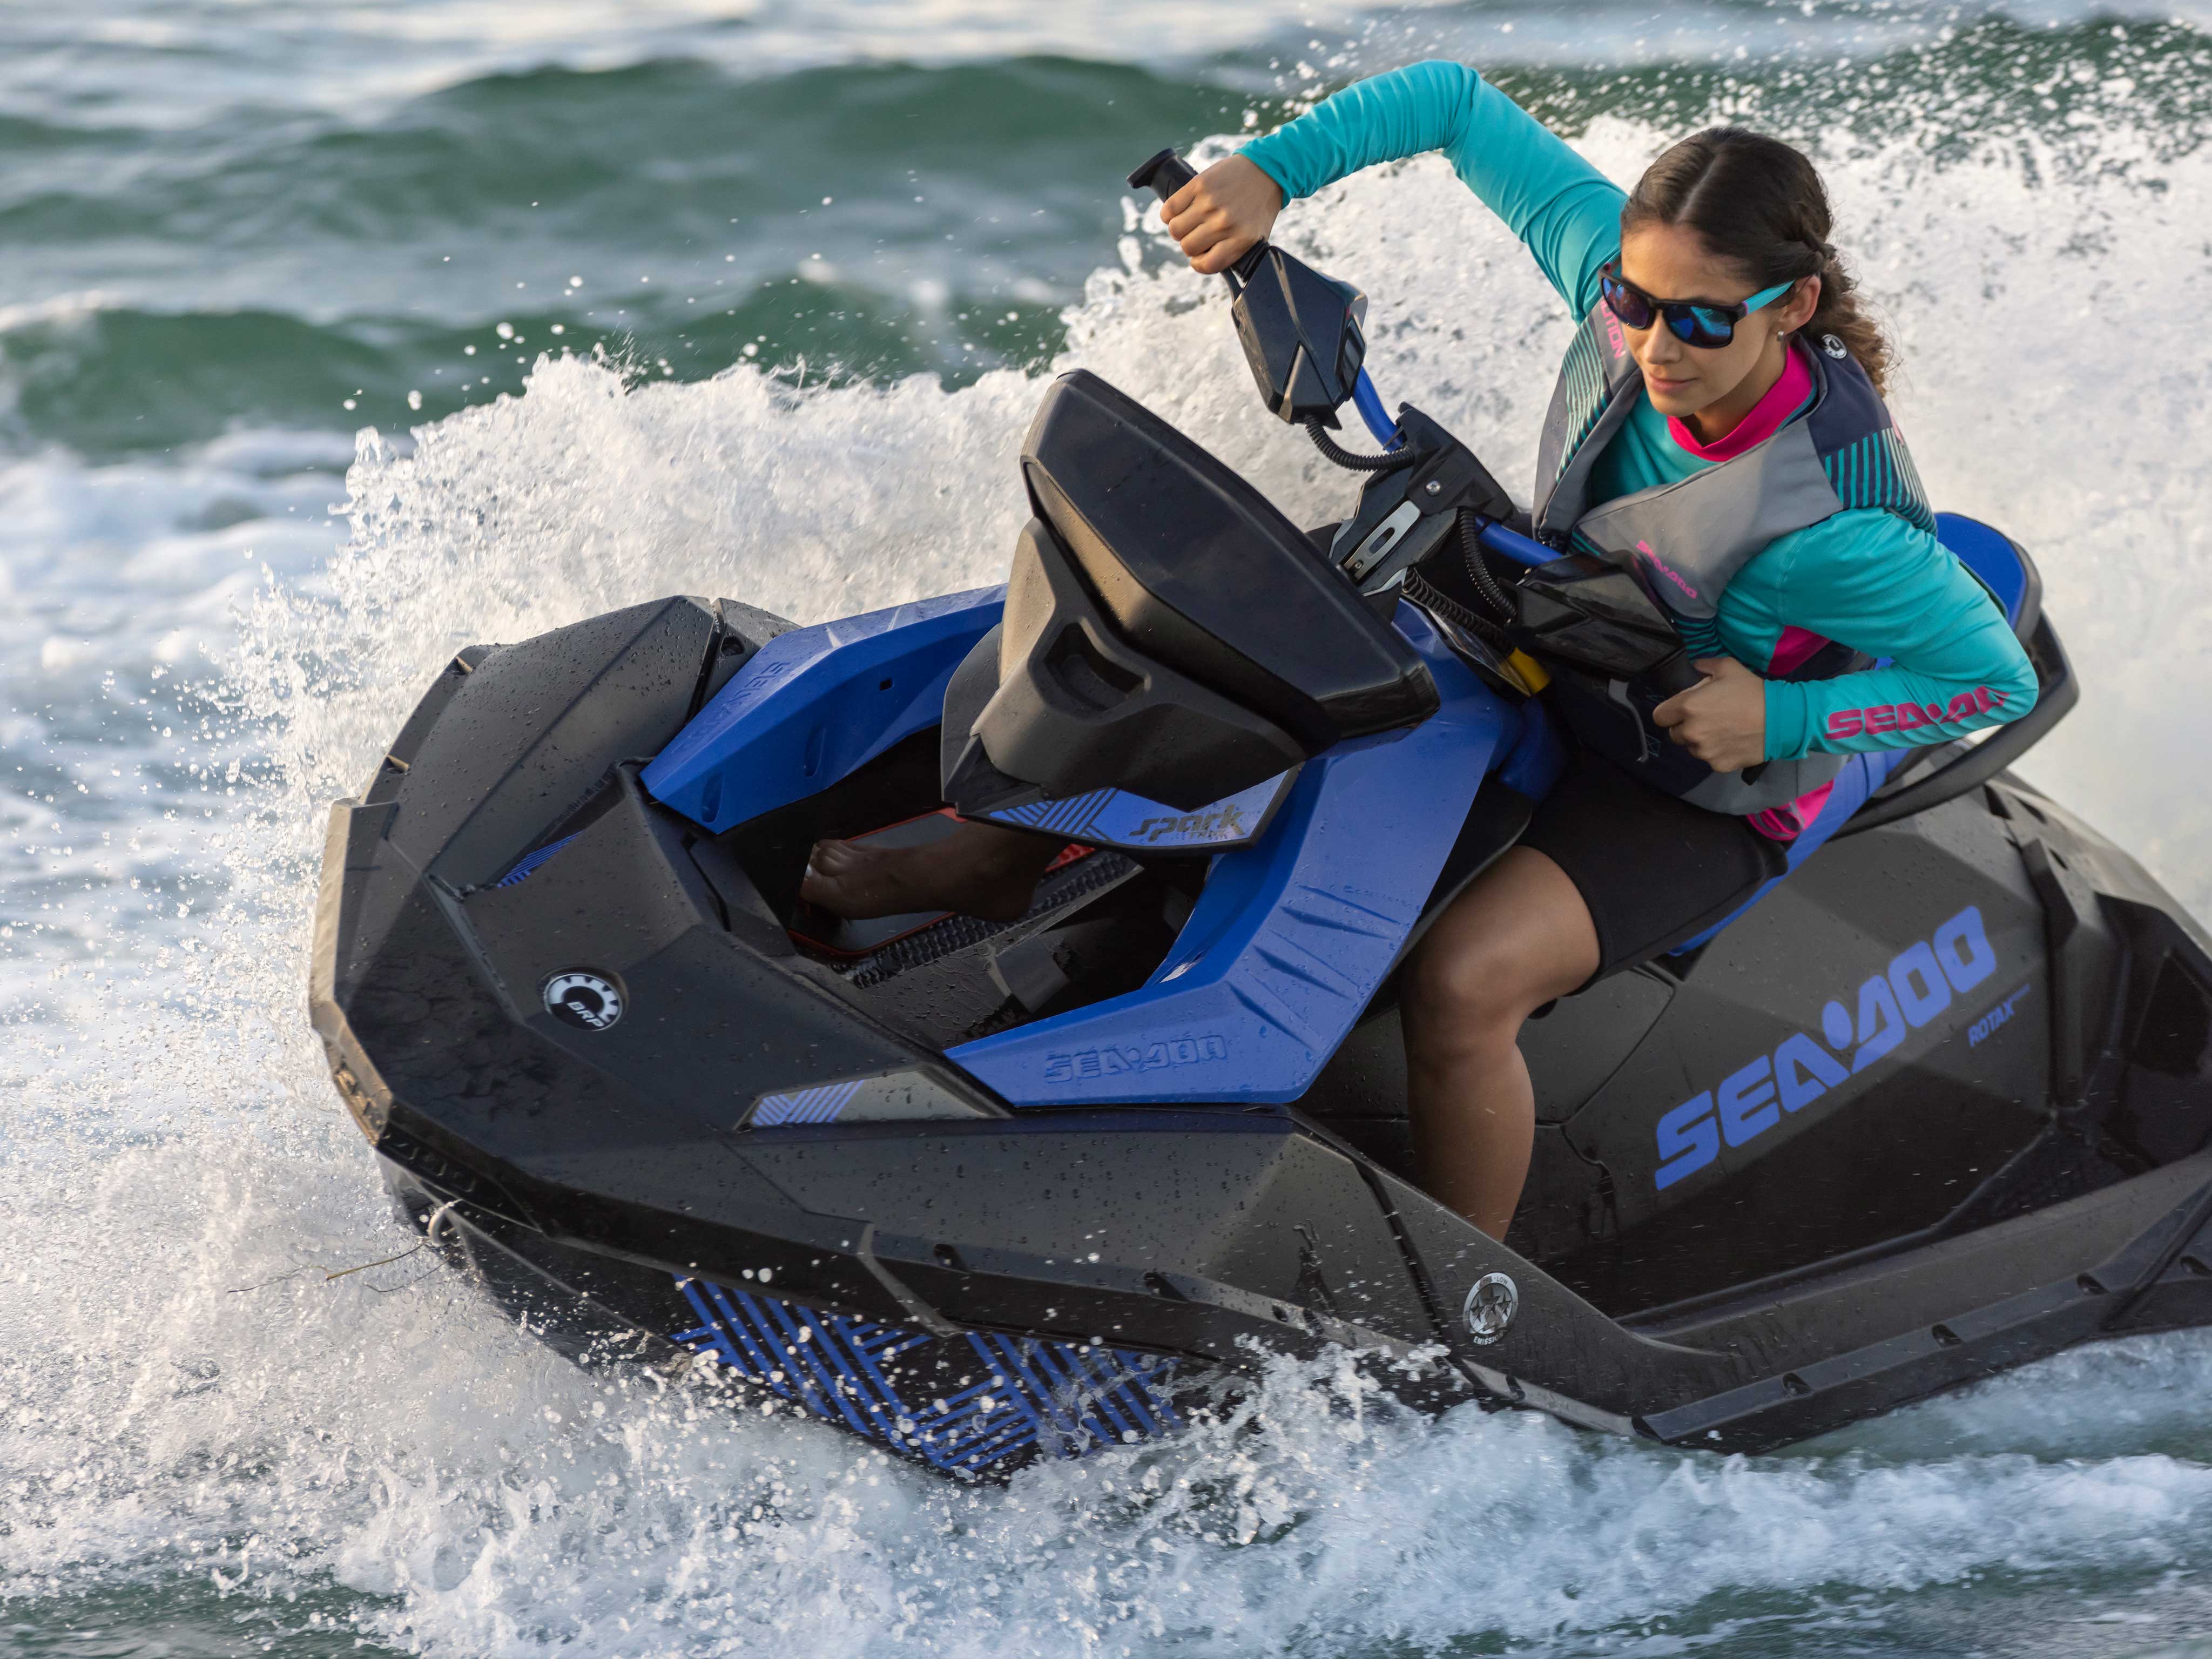 Woman carving water with her 2022 Sea-Doo Spark Trixx